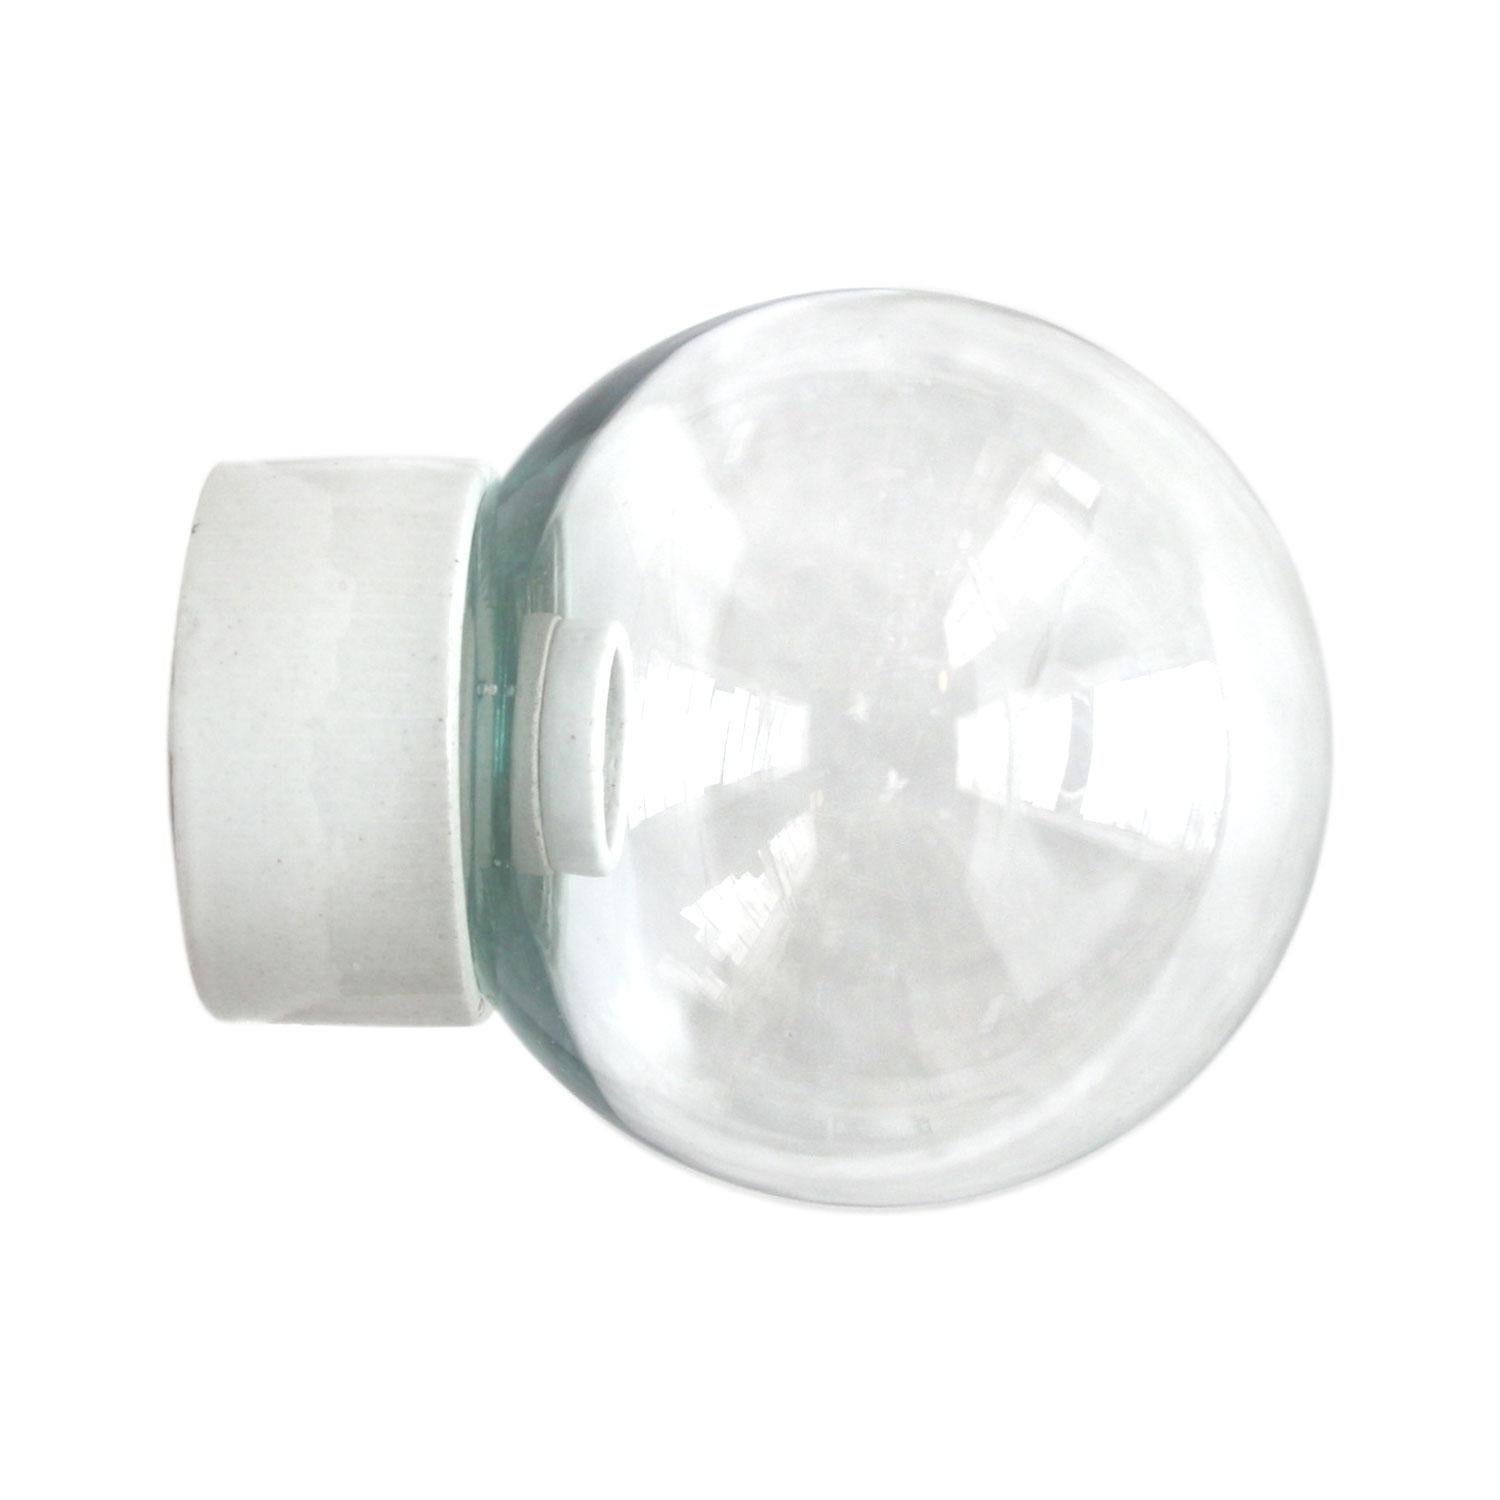 Industrial ceiling lamp.
White porcelain, clear glass.

2 conductors, no ground.
Measures: Diameter foot 10 cm
Suitable for 110 volt USA
new wiring is CE certified (220 volt)  or UL Listed (110 volt) 

Weight: 1.1 kg / 2.4 lb

Priced per individual